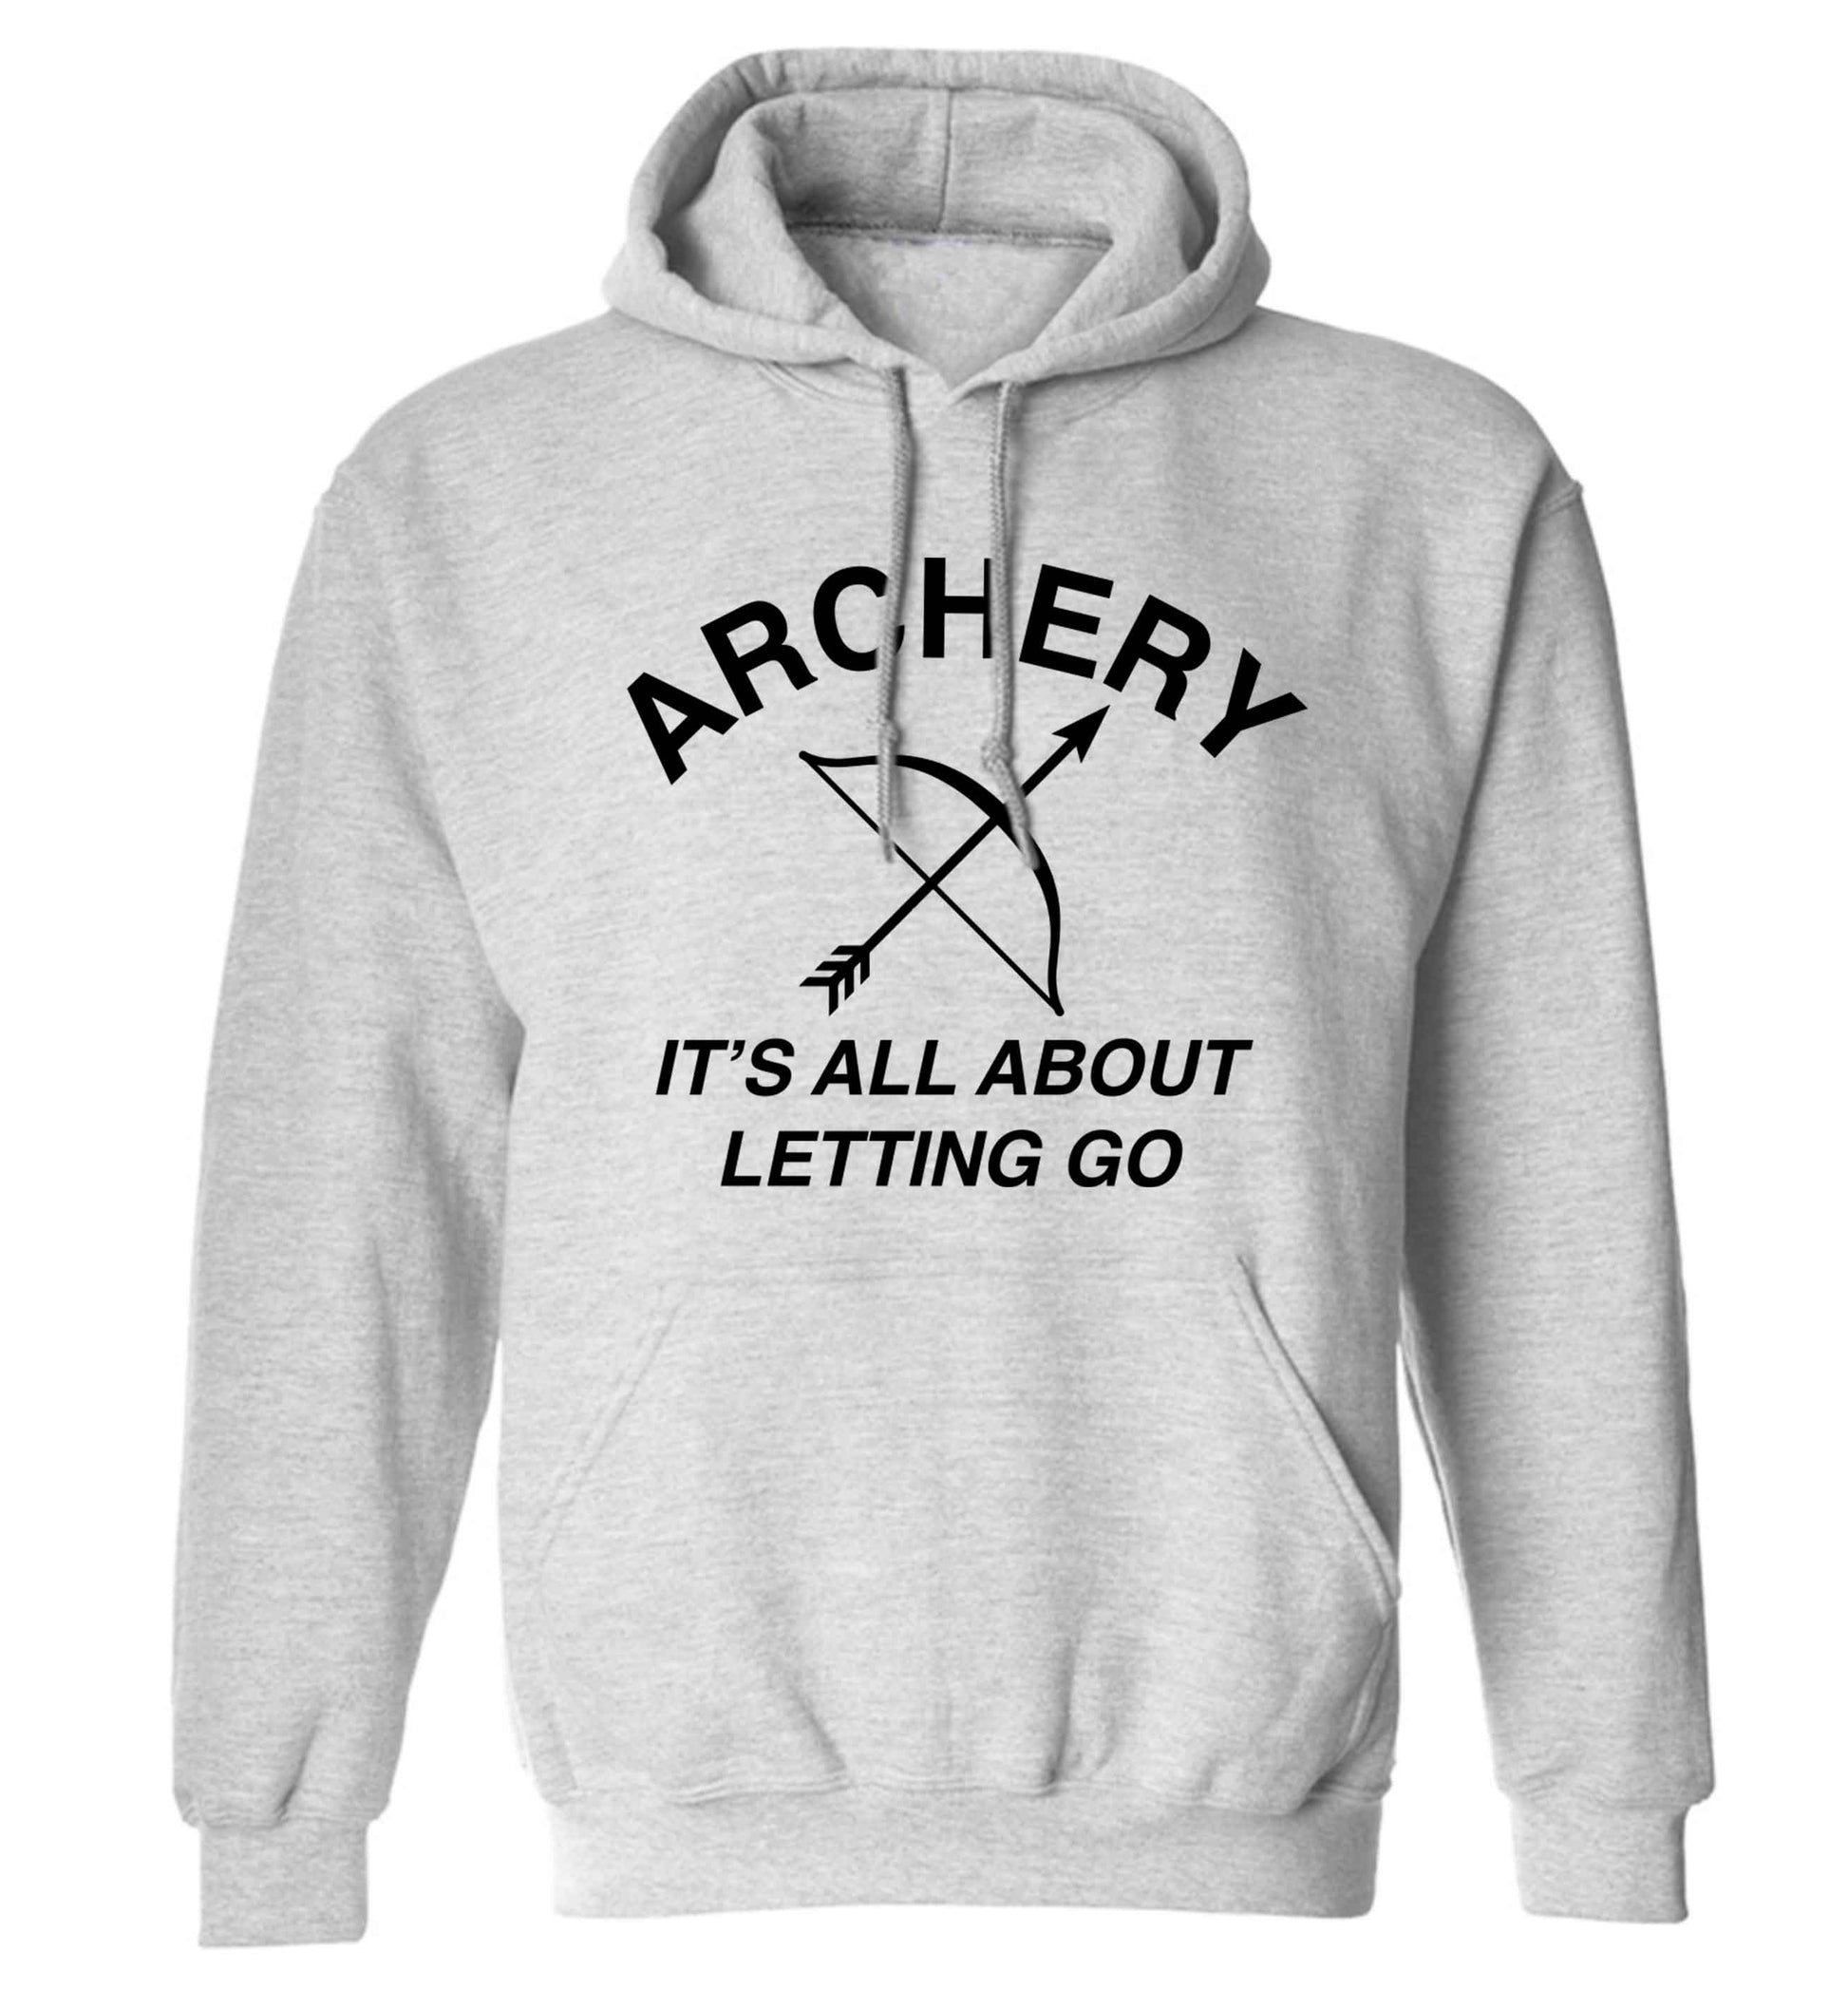 Archery it's all about letting go adults unisex grey hoodie 2XL